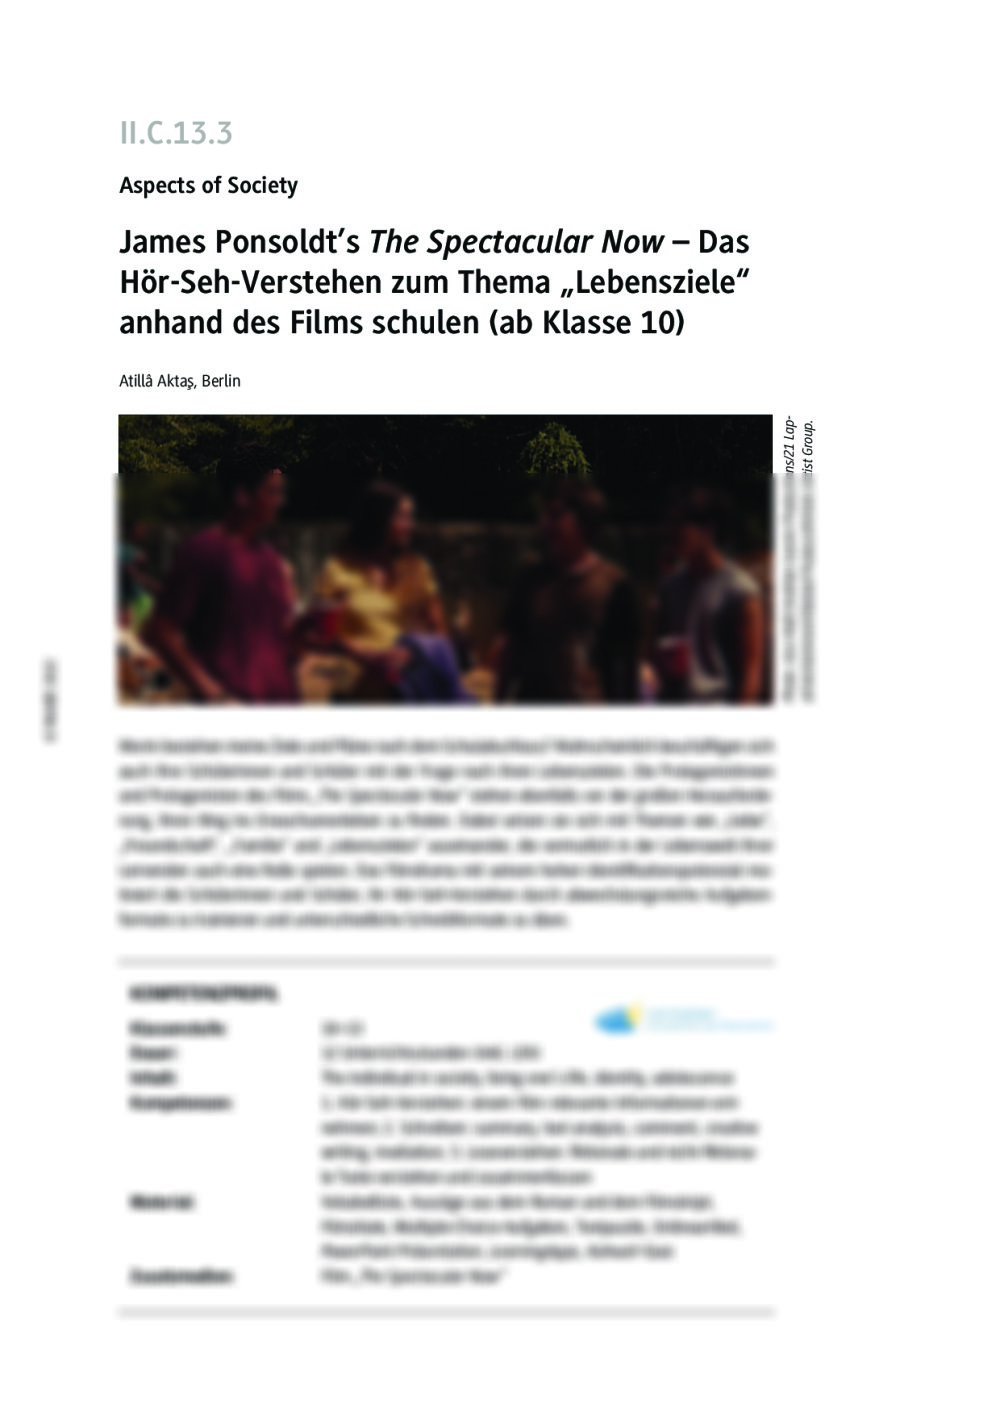 James Ponsoldt's "The Spectacular Now" - Seite 1